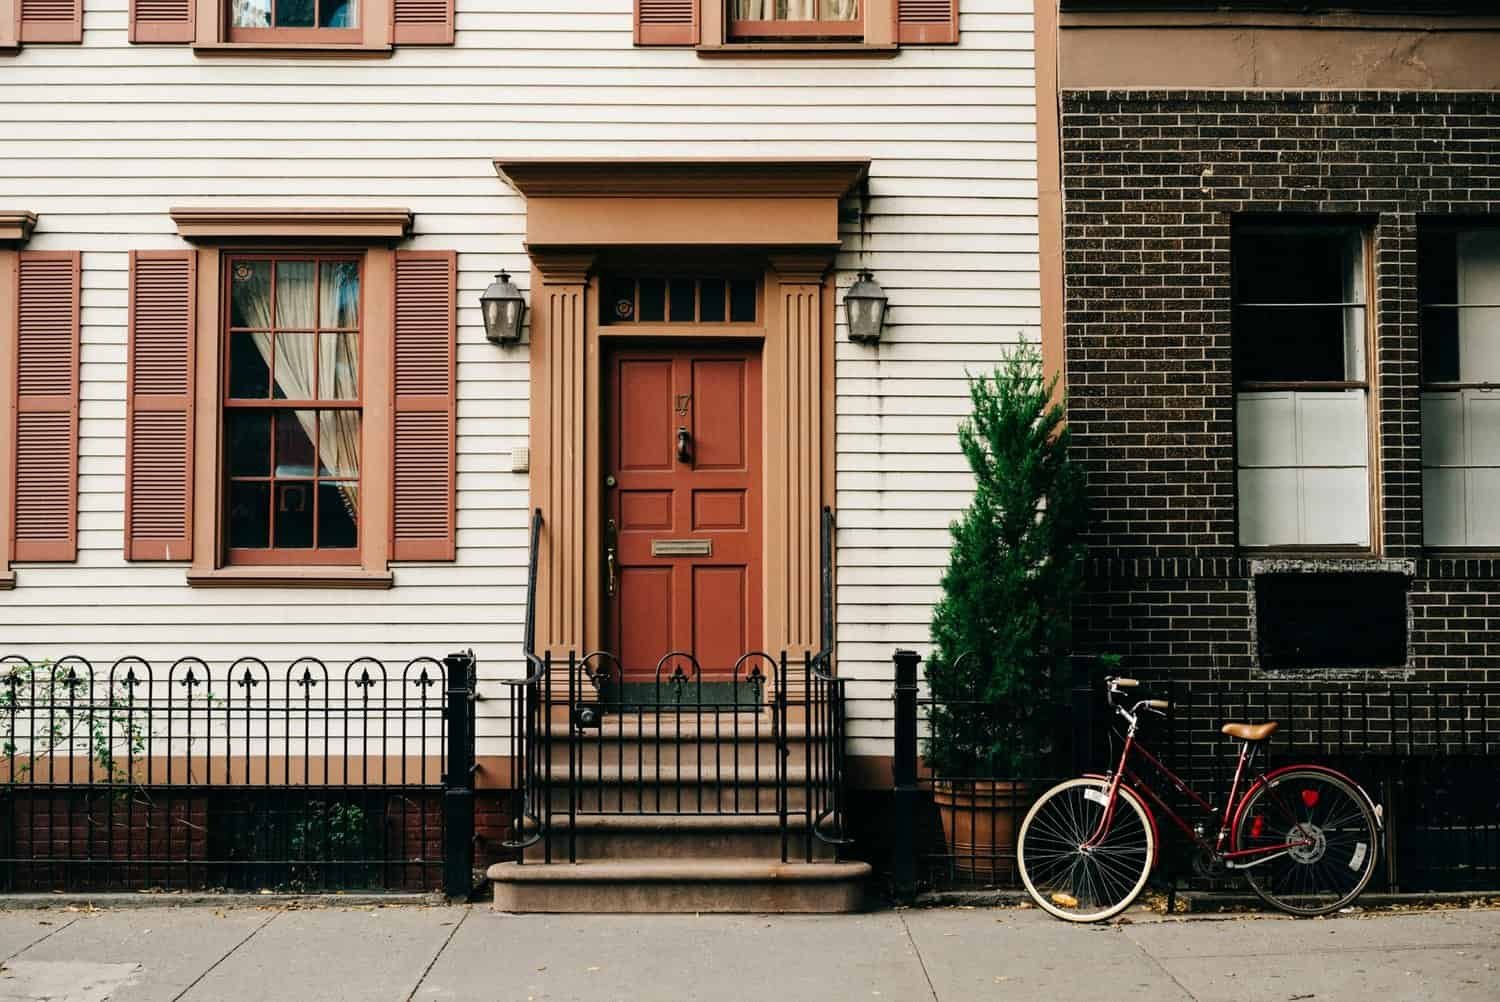 Photo of a charming house exterior featuring freshly painted white siding with red trim around the windows and door. The red front door and shutters add a vibrant touch, complemented by black wrought iron fencing and a red bicycle parked nearby.